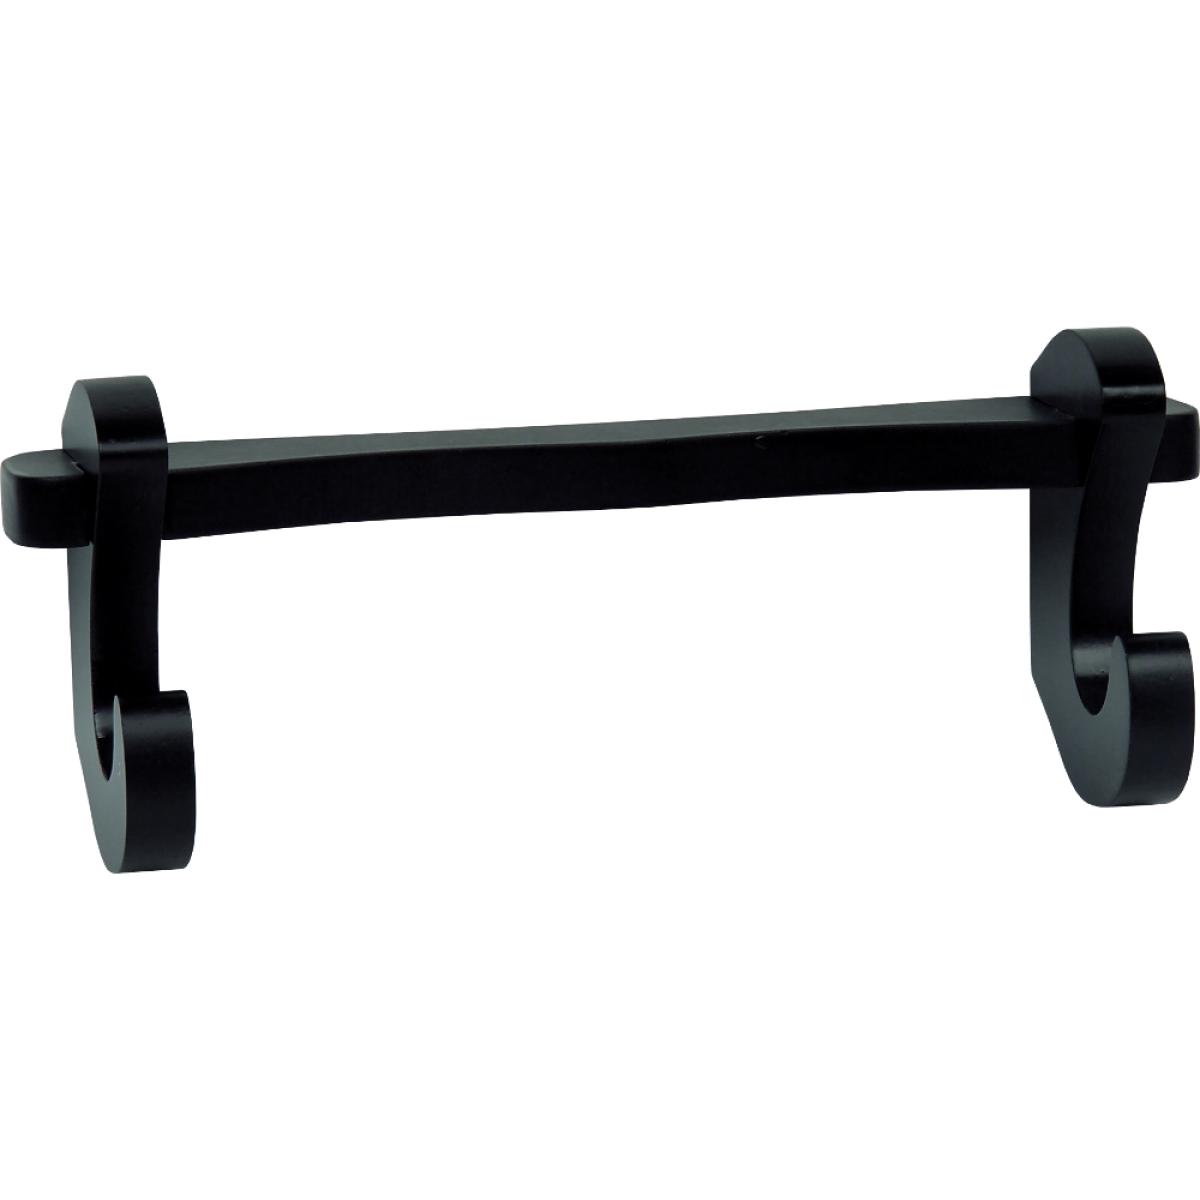 Wall sword holder for one weapon ➤ www.bokken-shop.de »Wall weapon stand for 1 katana or 1 weapon - your Budo dealer!